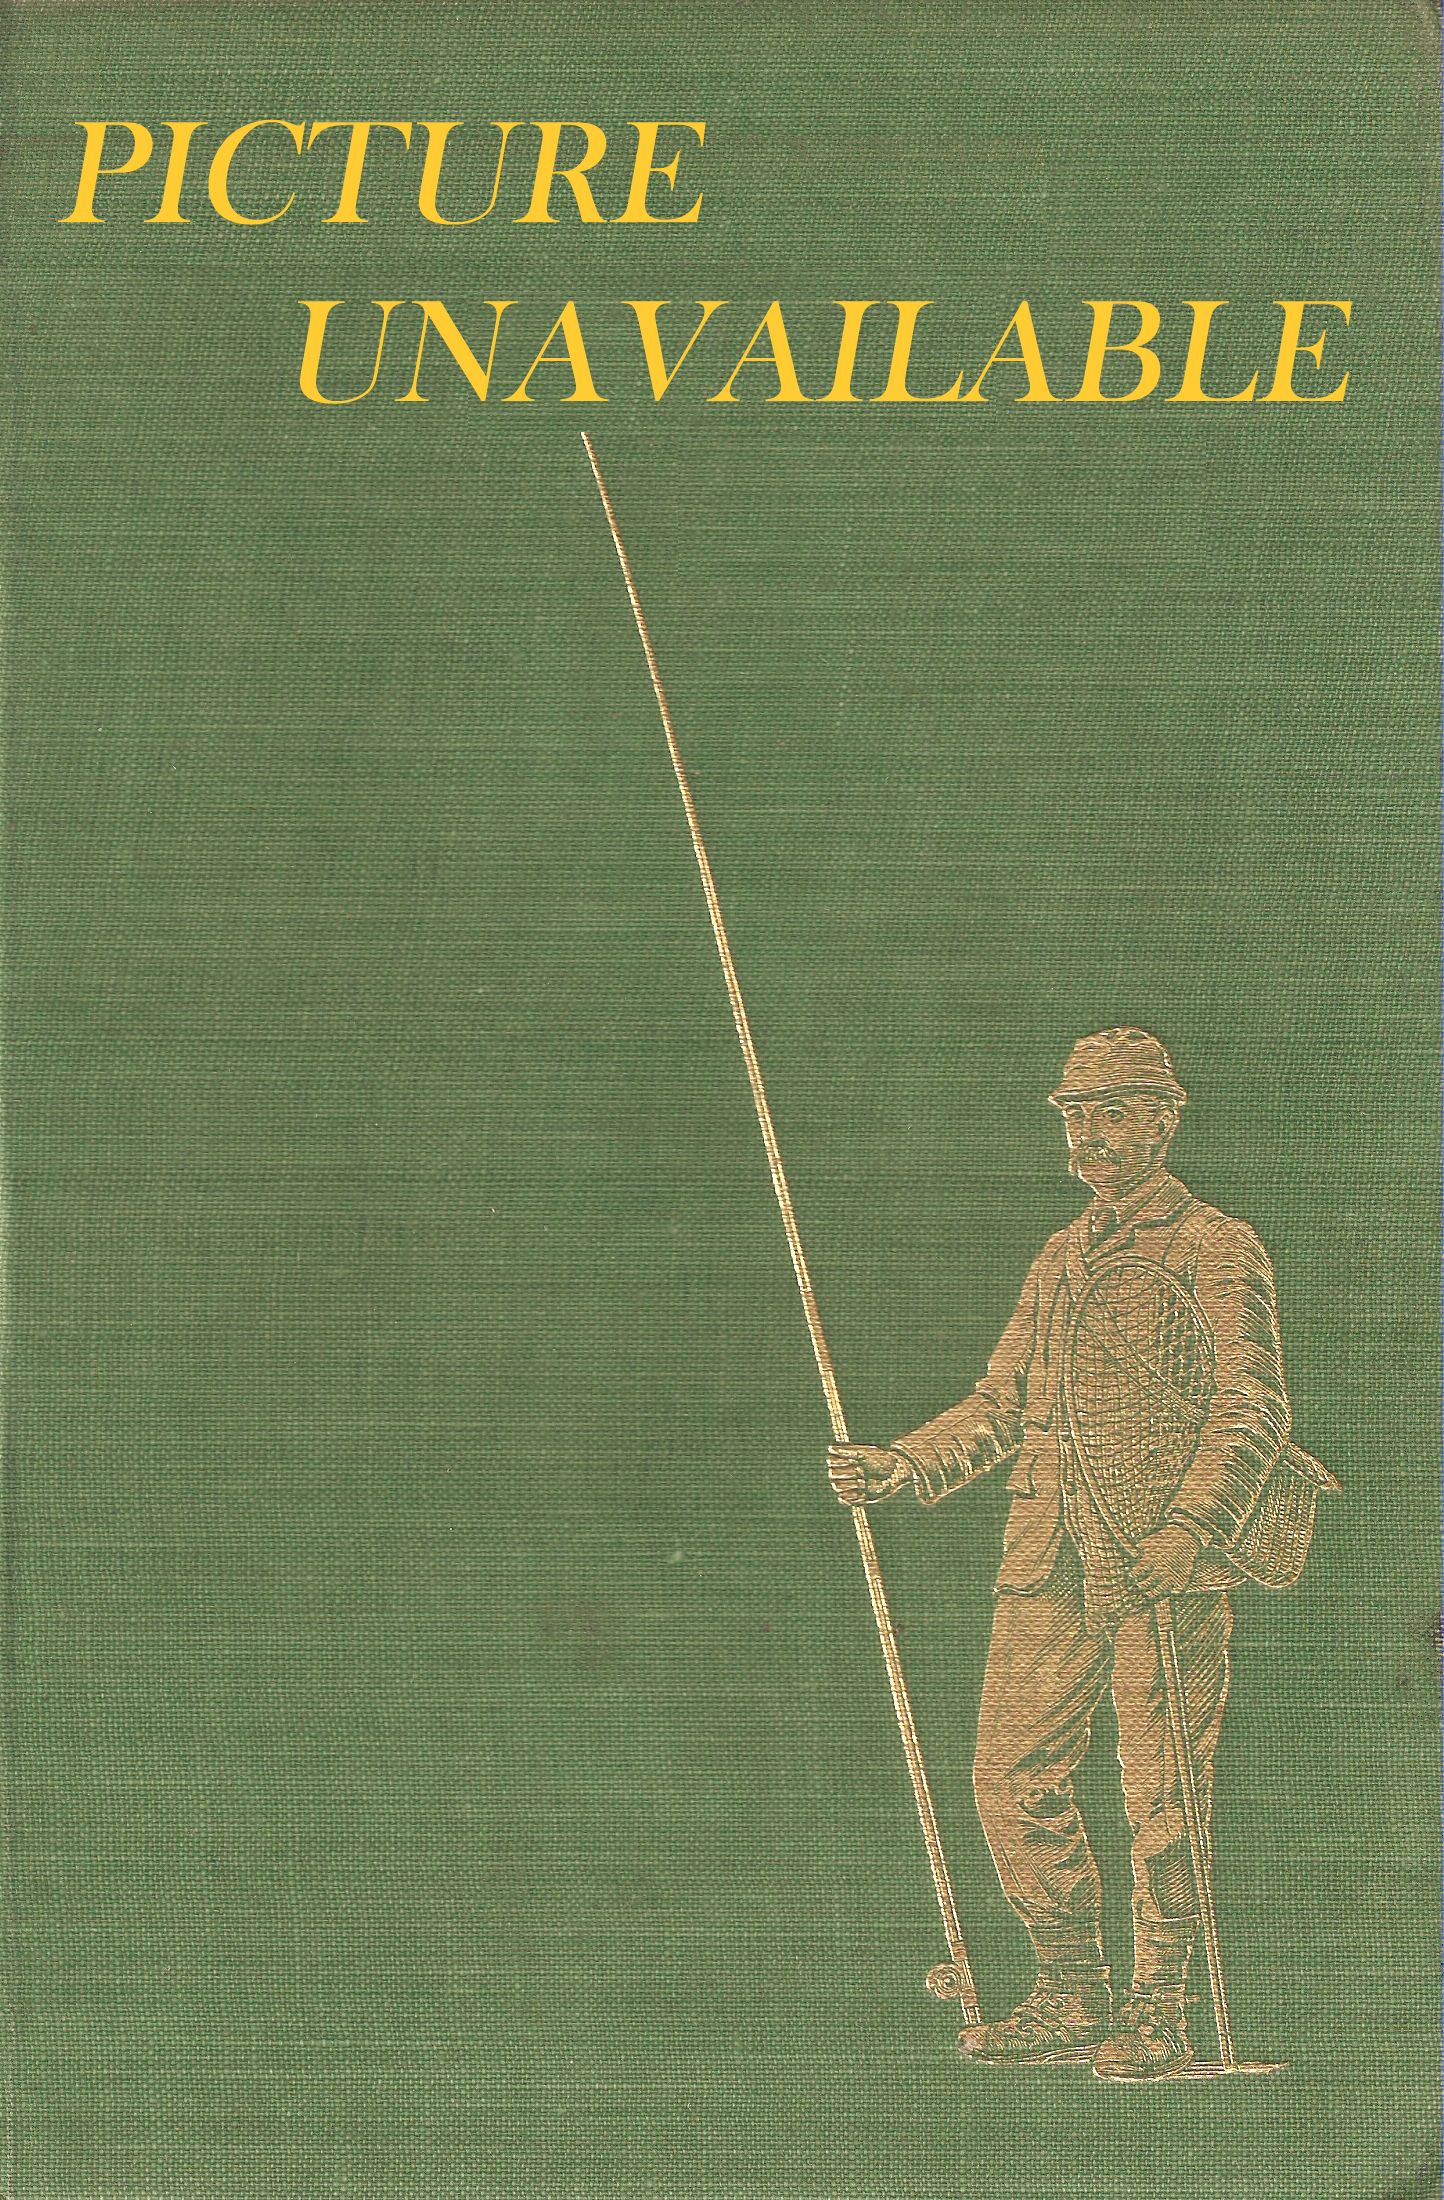 WORLD OF ANGLING: 1972 - 1973. Edited by Colin Graham.